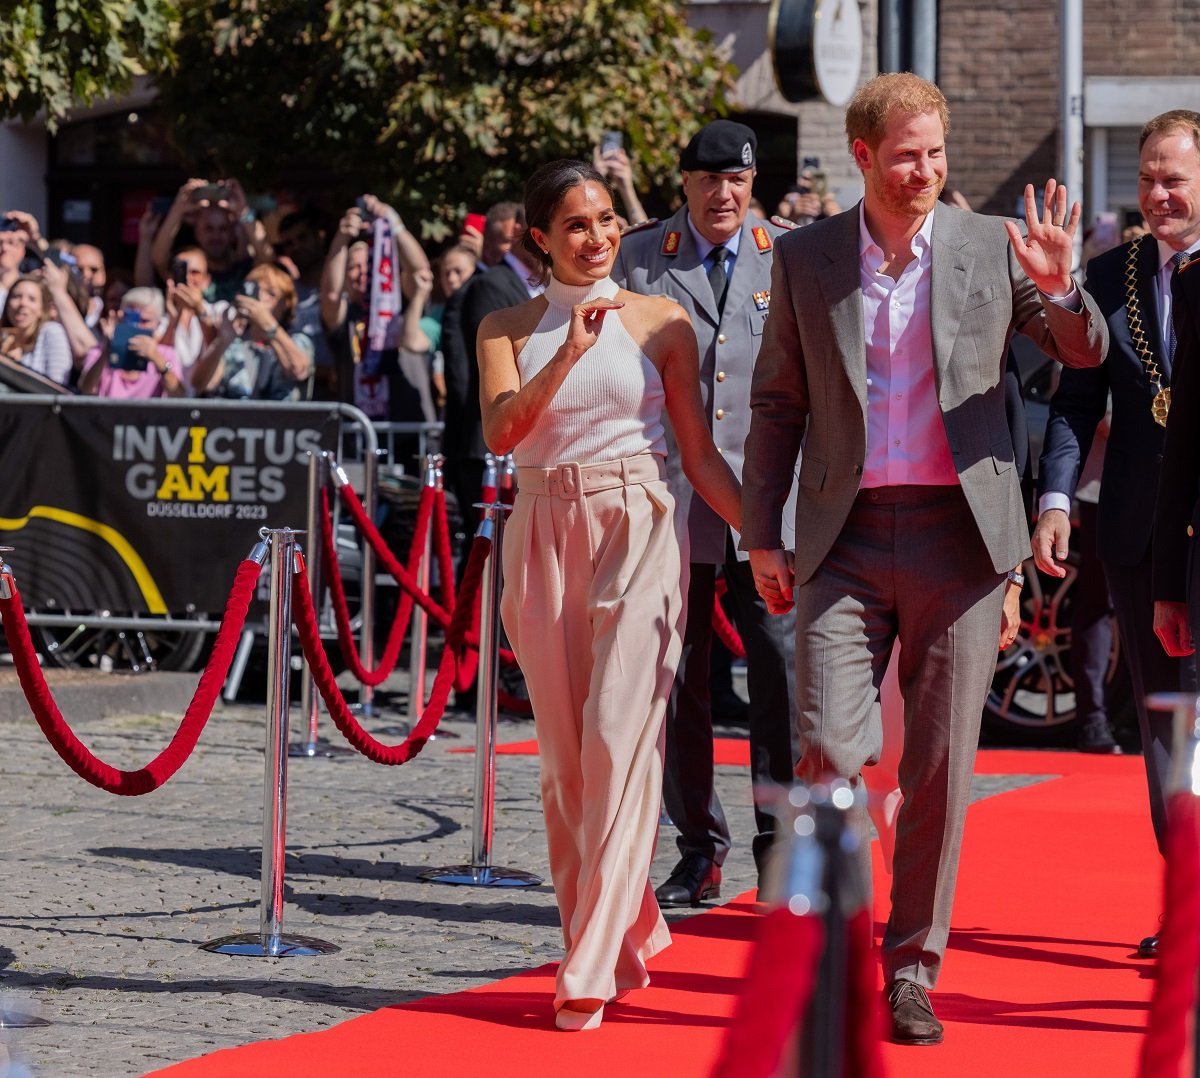 Prince Harry and Meghan Markle, whose body language on the red carpet changed after she became a royal, arrive in front of City Hall and walk a red carpet in Düsseldorf, Germany